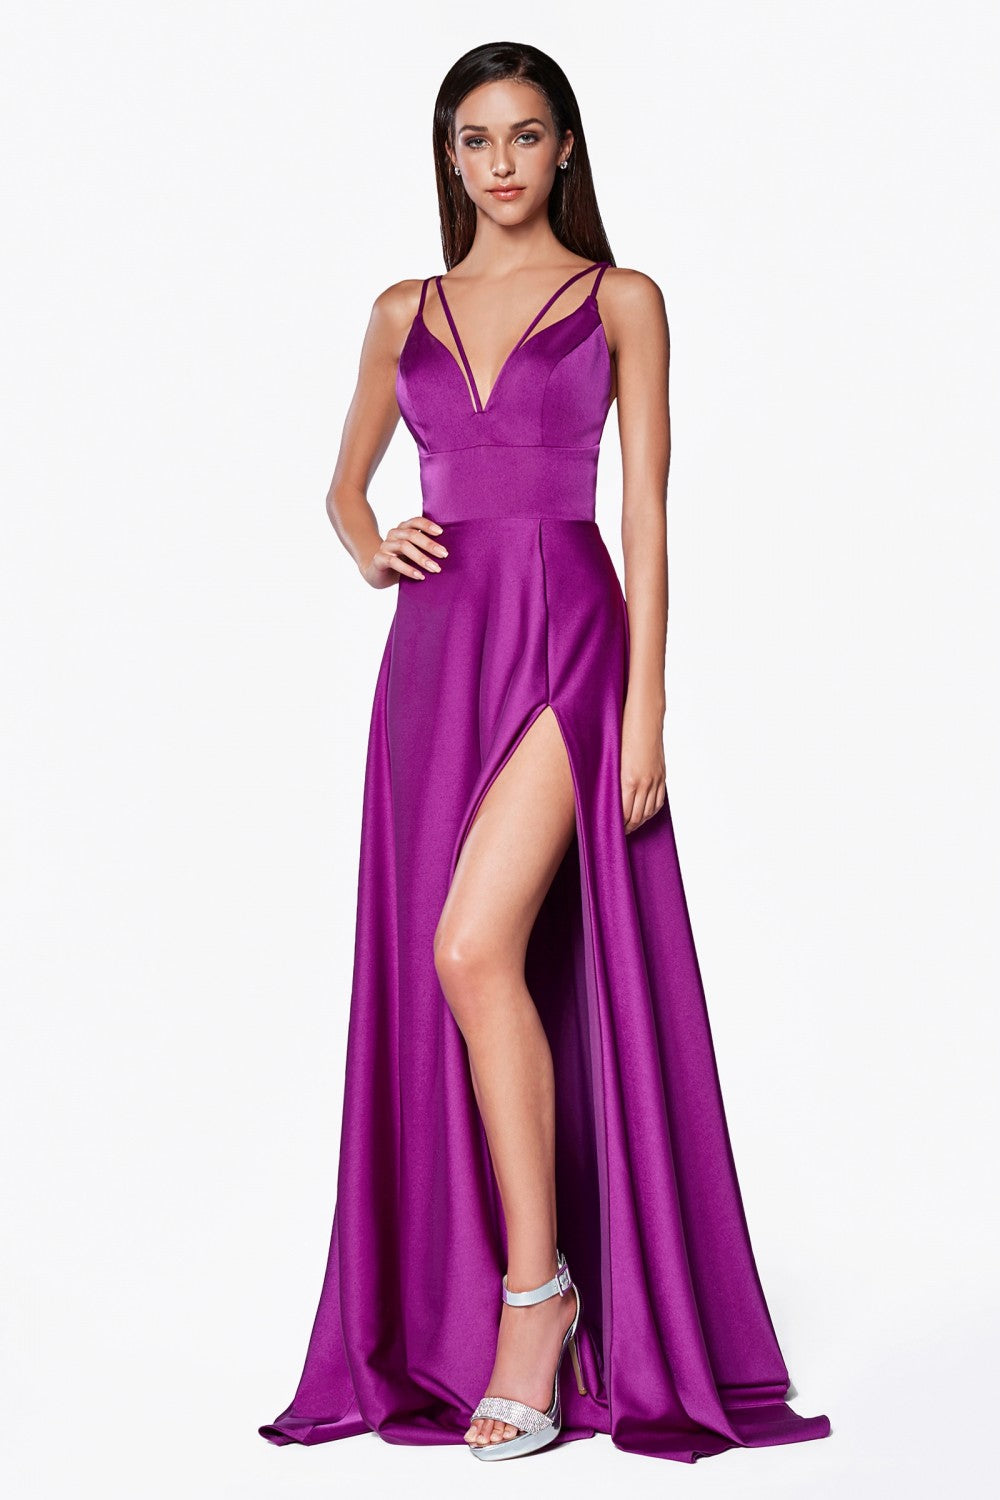 Double Criss Cross Straps Reckless High Leg Slit prom gown-smcdress